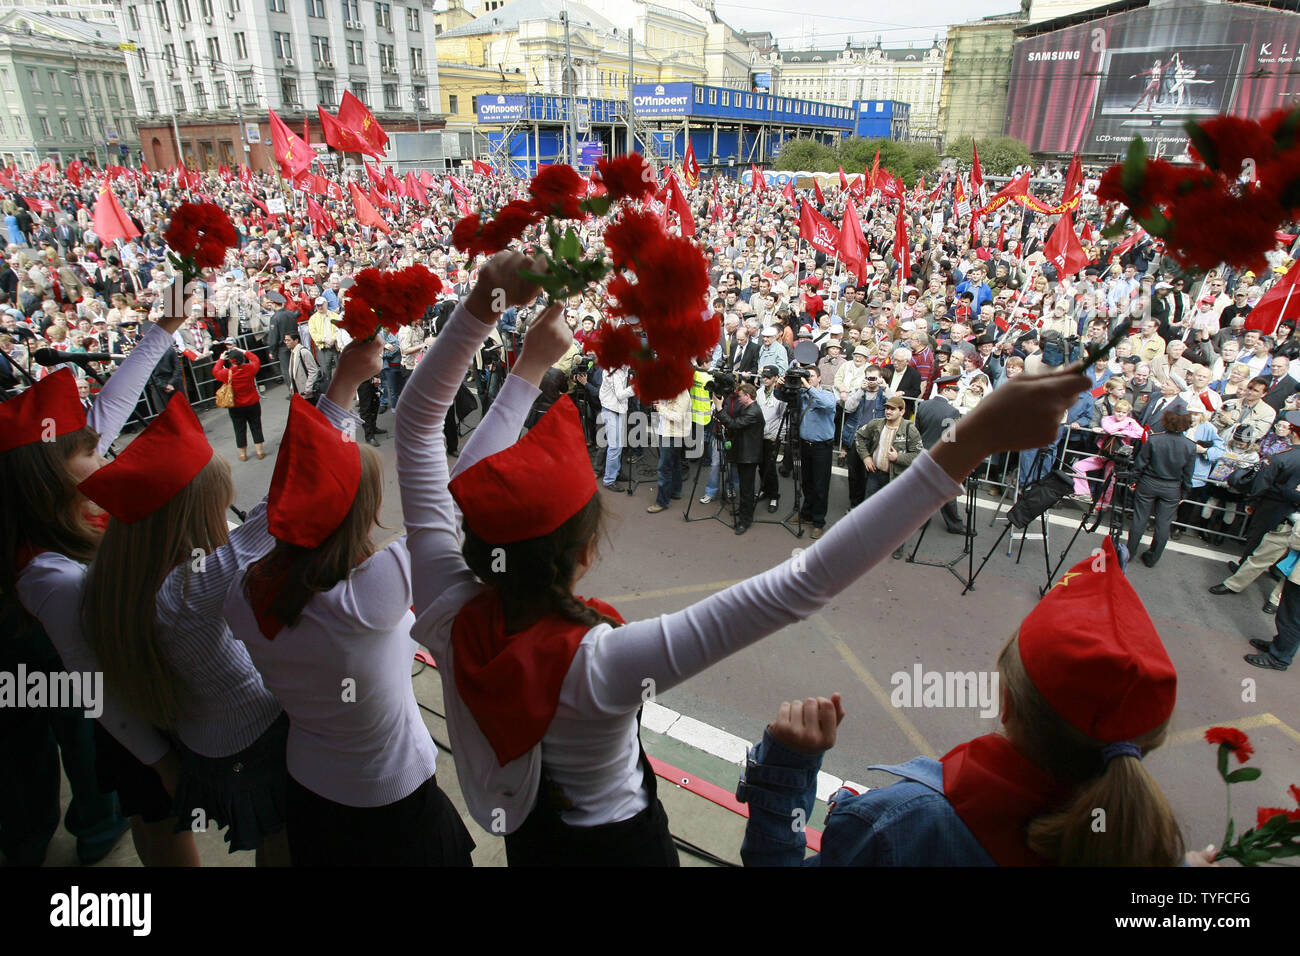 Russian communist party members and young supporters rally in central Moscow on May 1, 2008. Thousands of communists, members of Russian main political parties and opposition activists staged competing marches in Moscow and other cities Thursday marking the traditional May Day holiday. (UPI Photo/Anatoli Zhdanov) Stock Photo